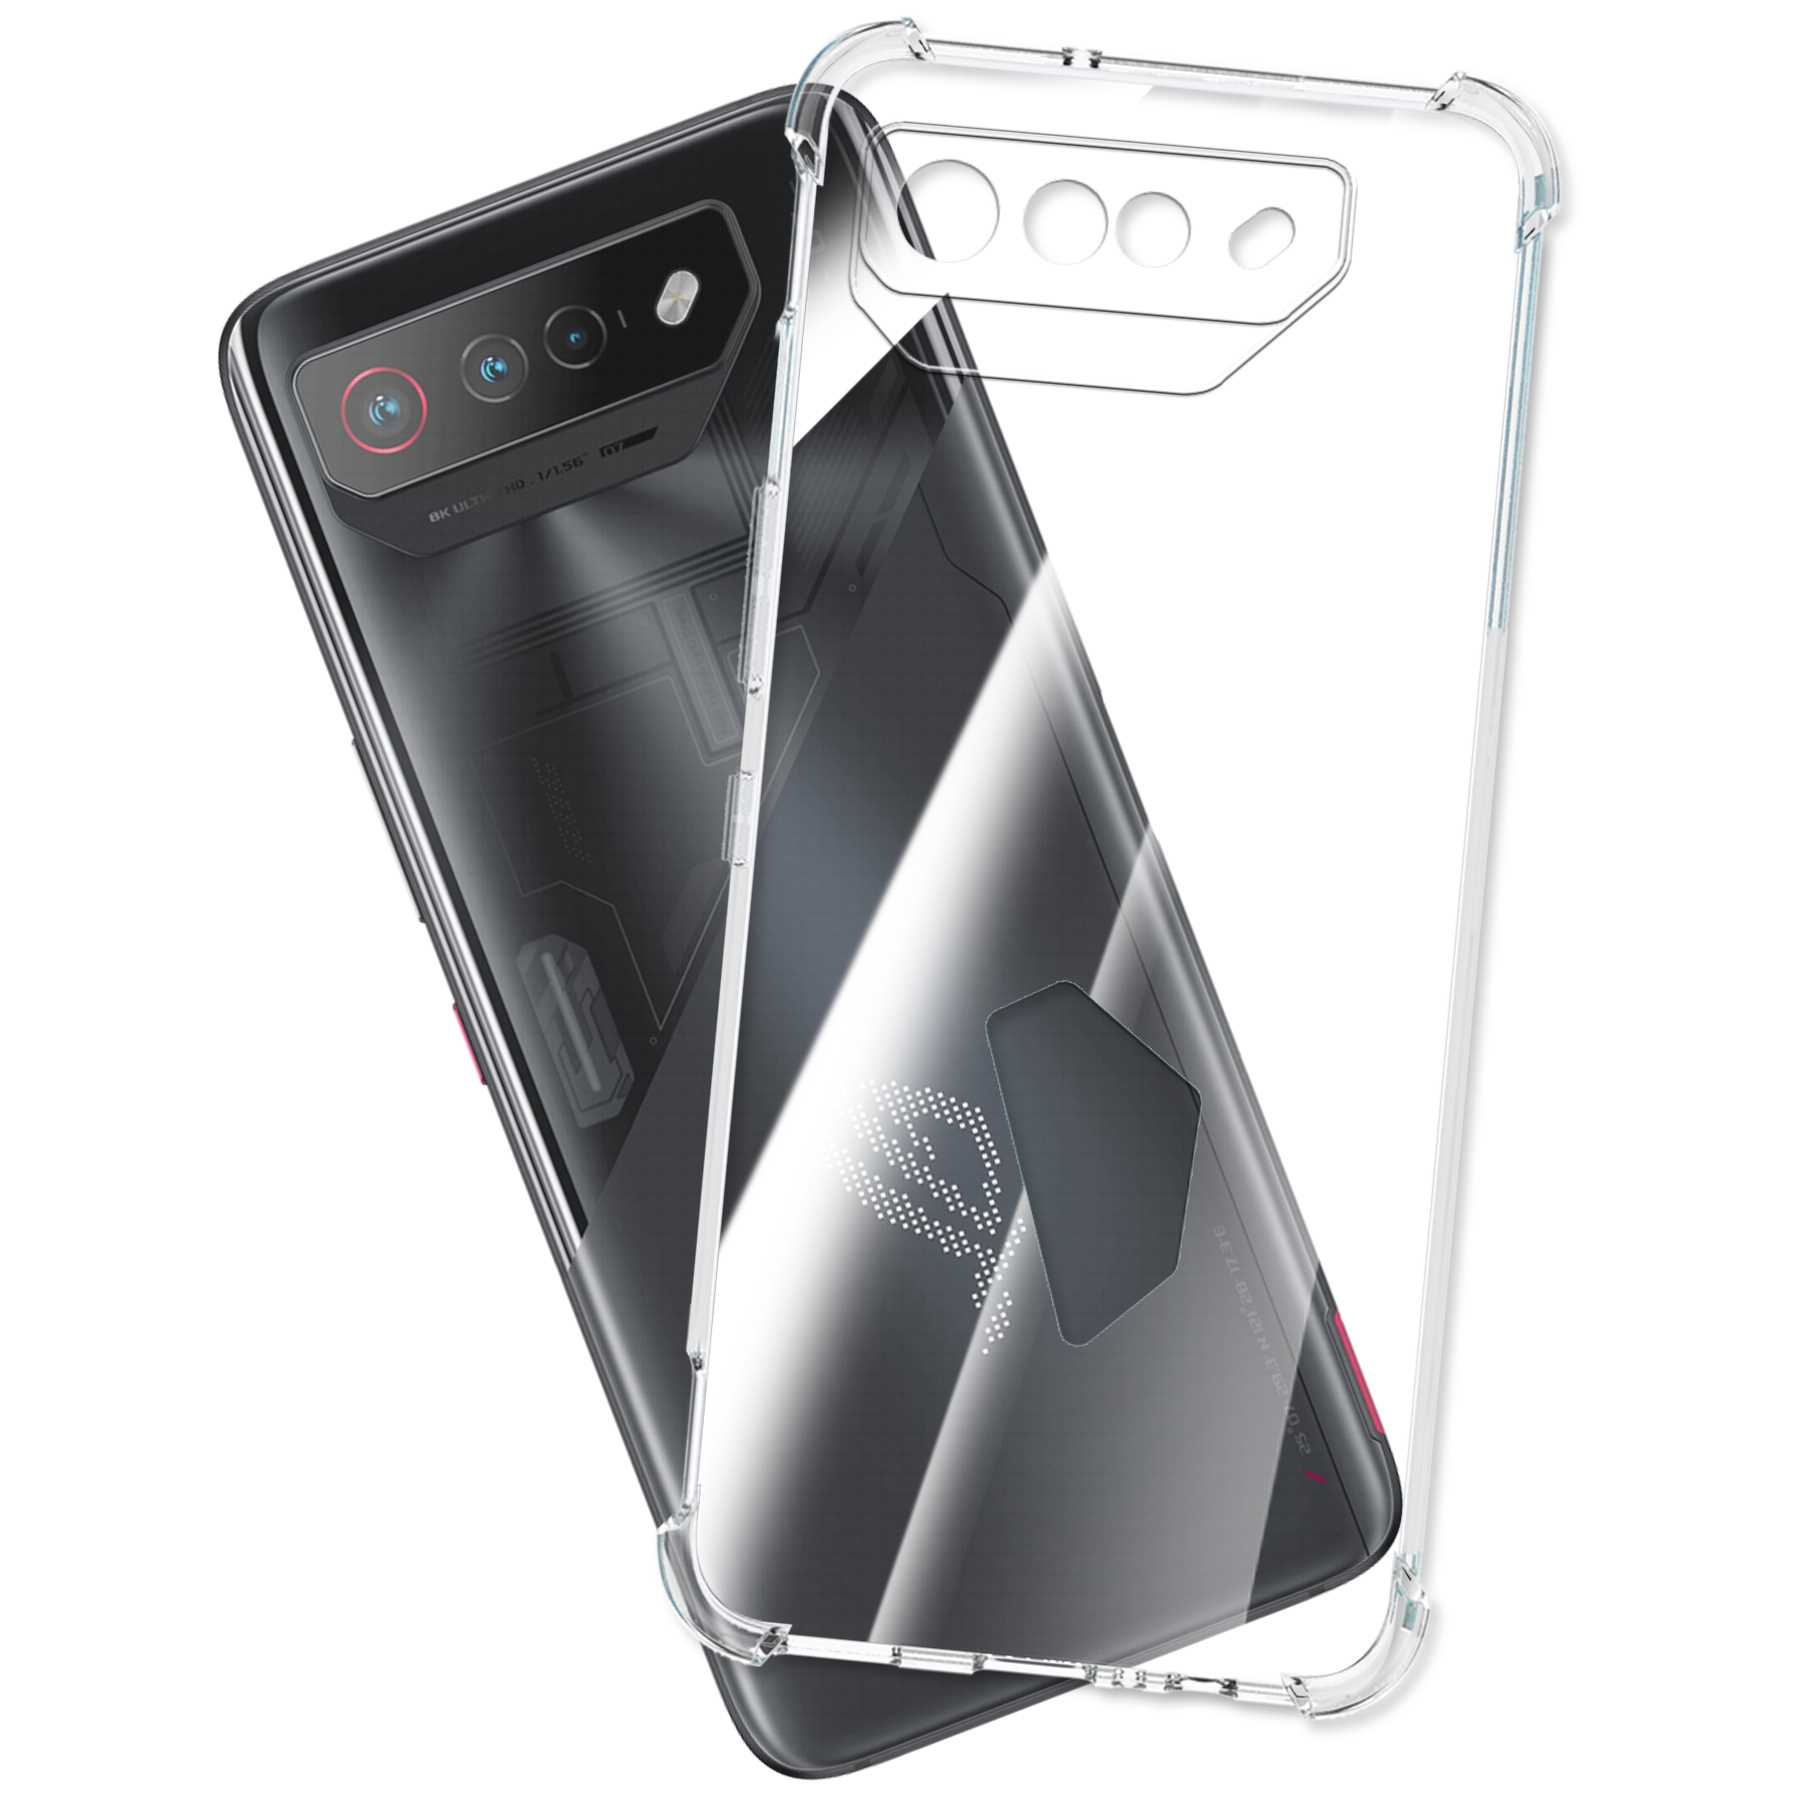 ROG Case, 7, ENERGY Clear Transparent Phone MTB MORE Asus, Armor Backcover,